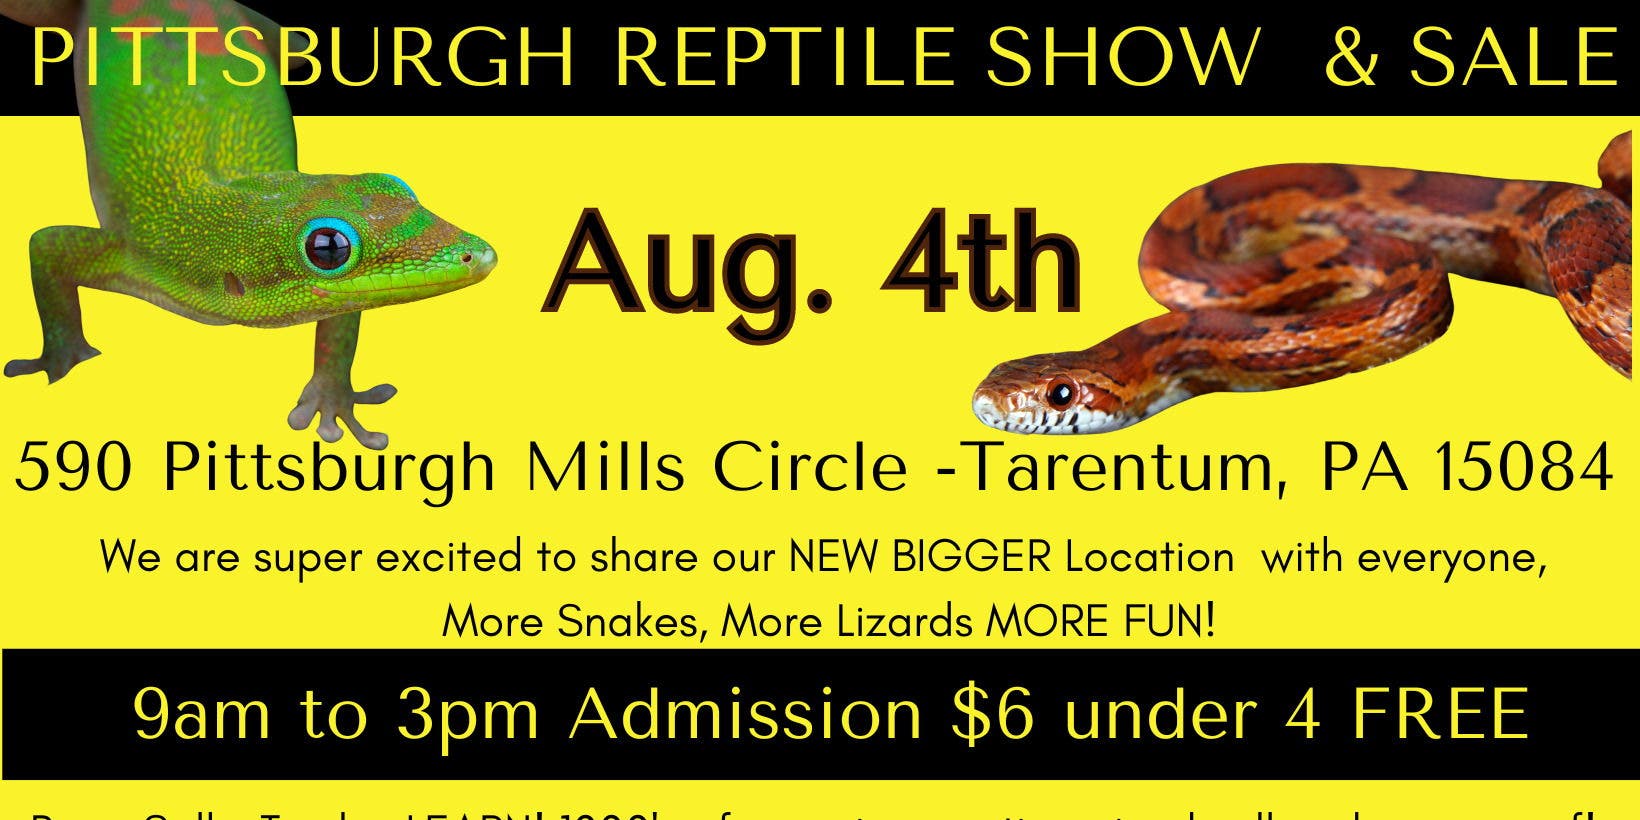 Pittsburgh Reptile Show & Sale Aug 4th